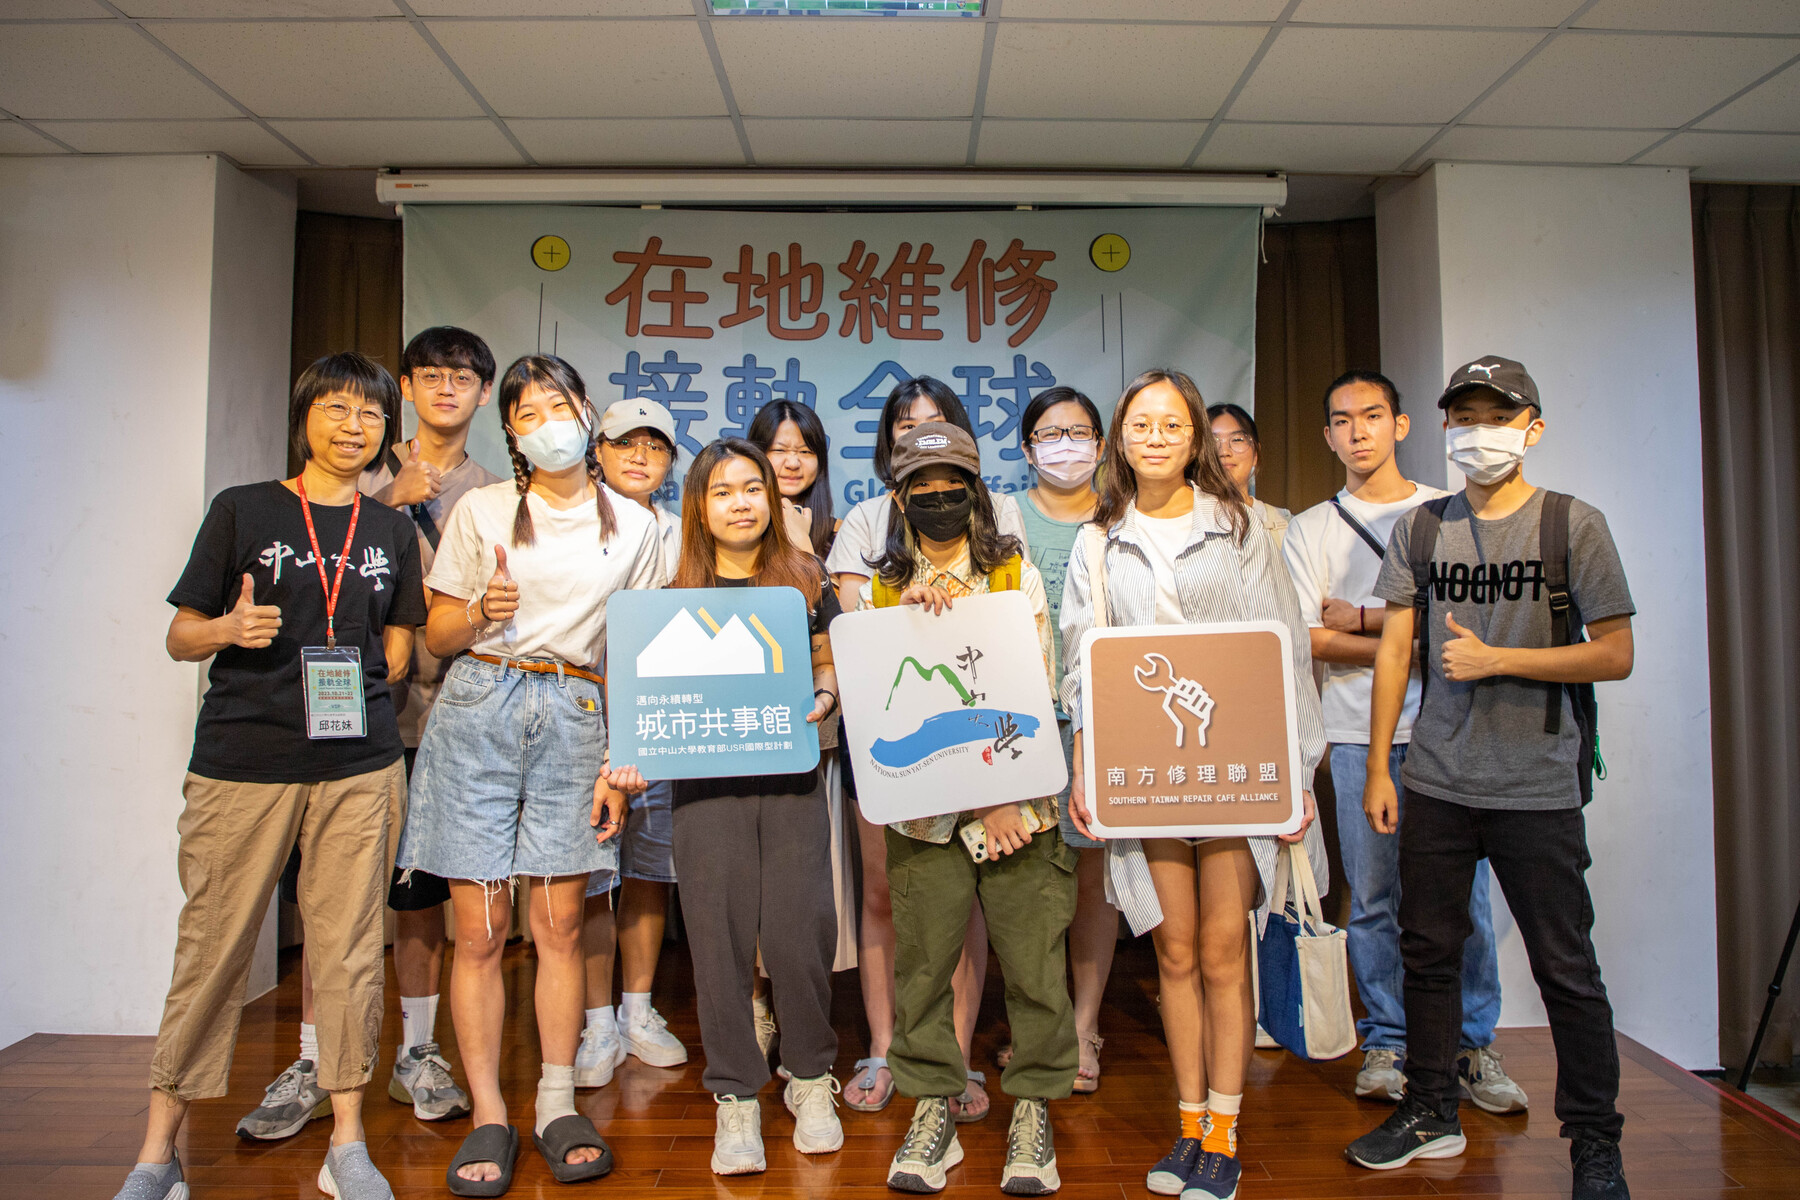 Faculty and students of the Environmental Sociology course at NSYSU participated in the Yancheng Repair Café activity